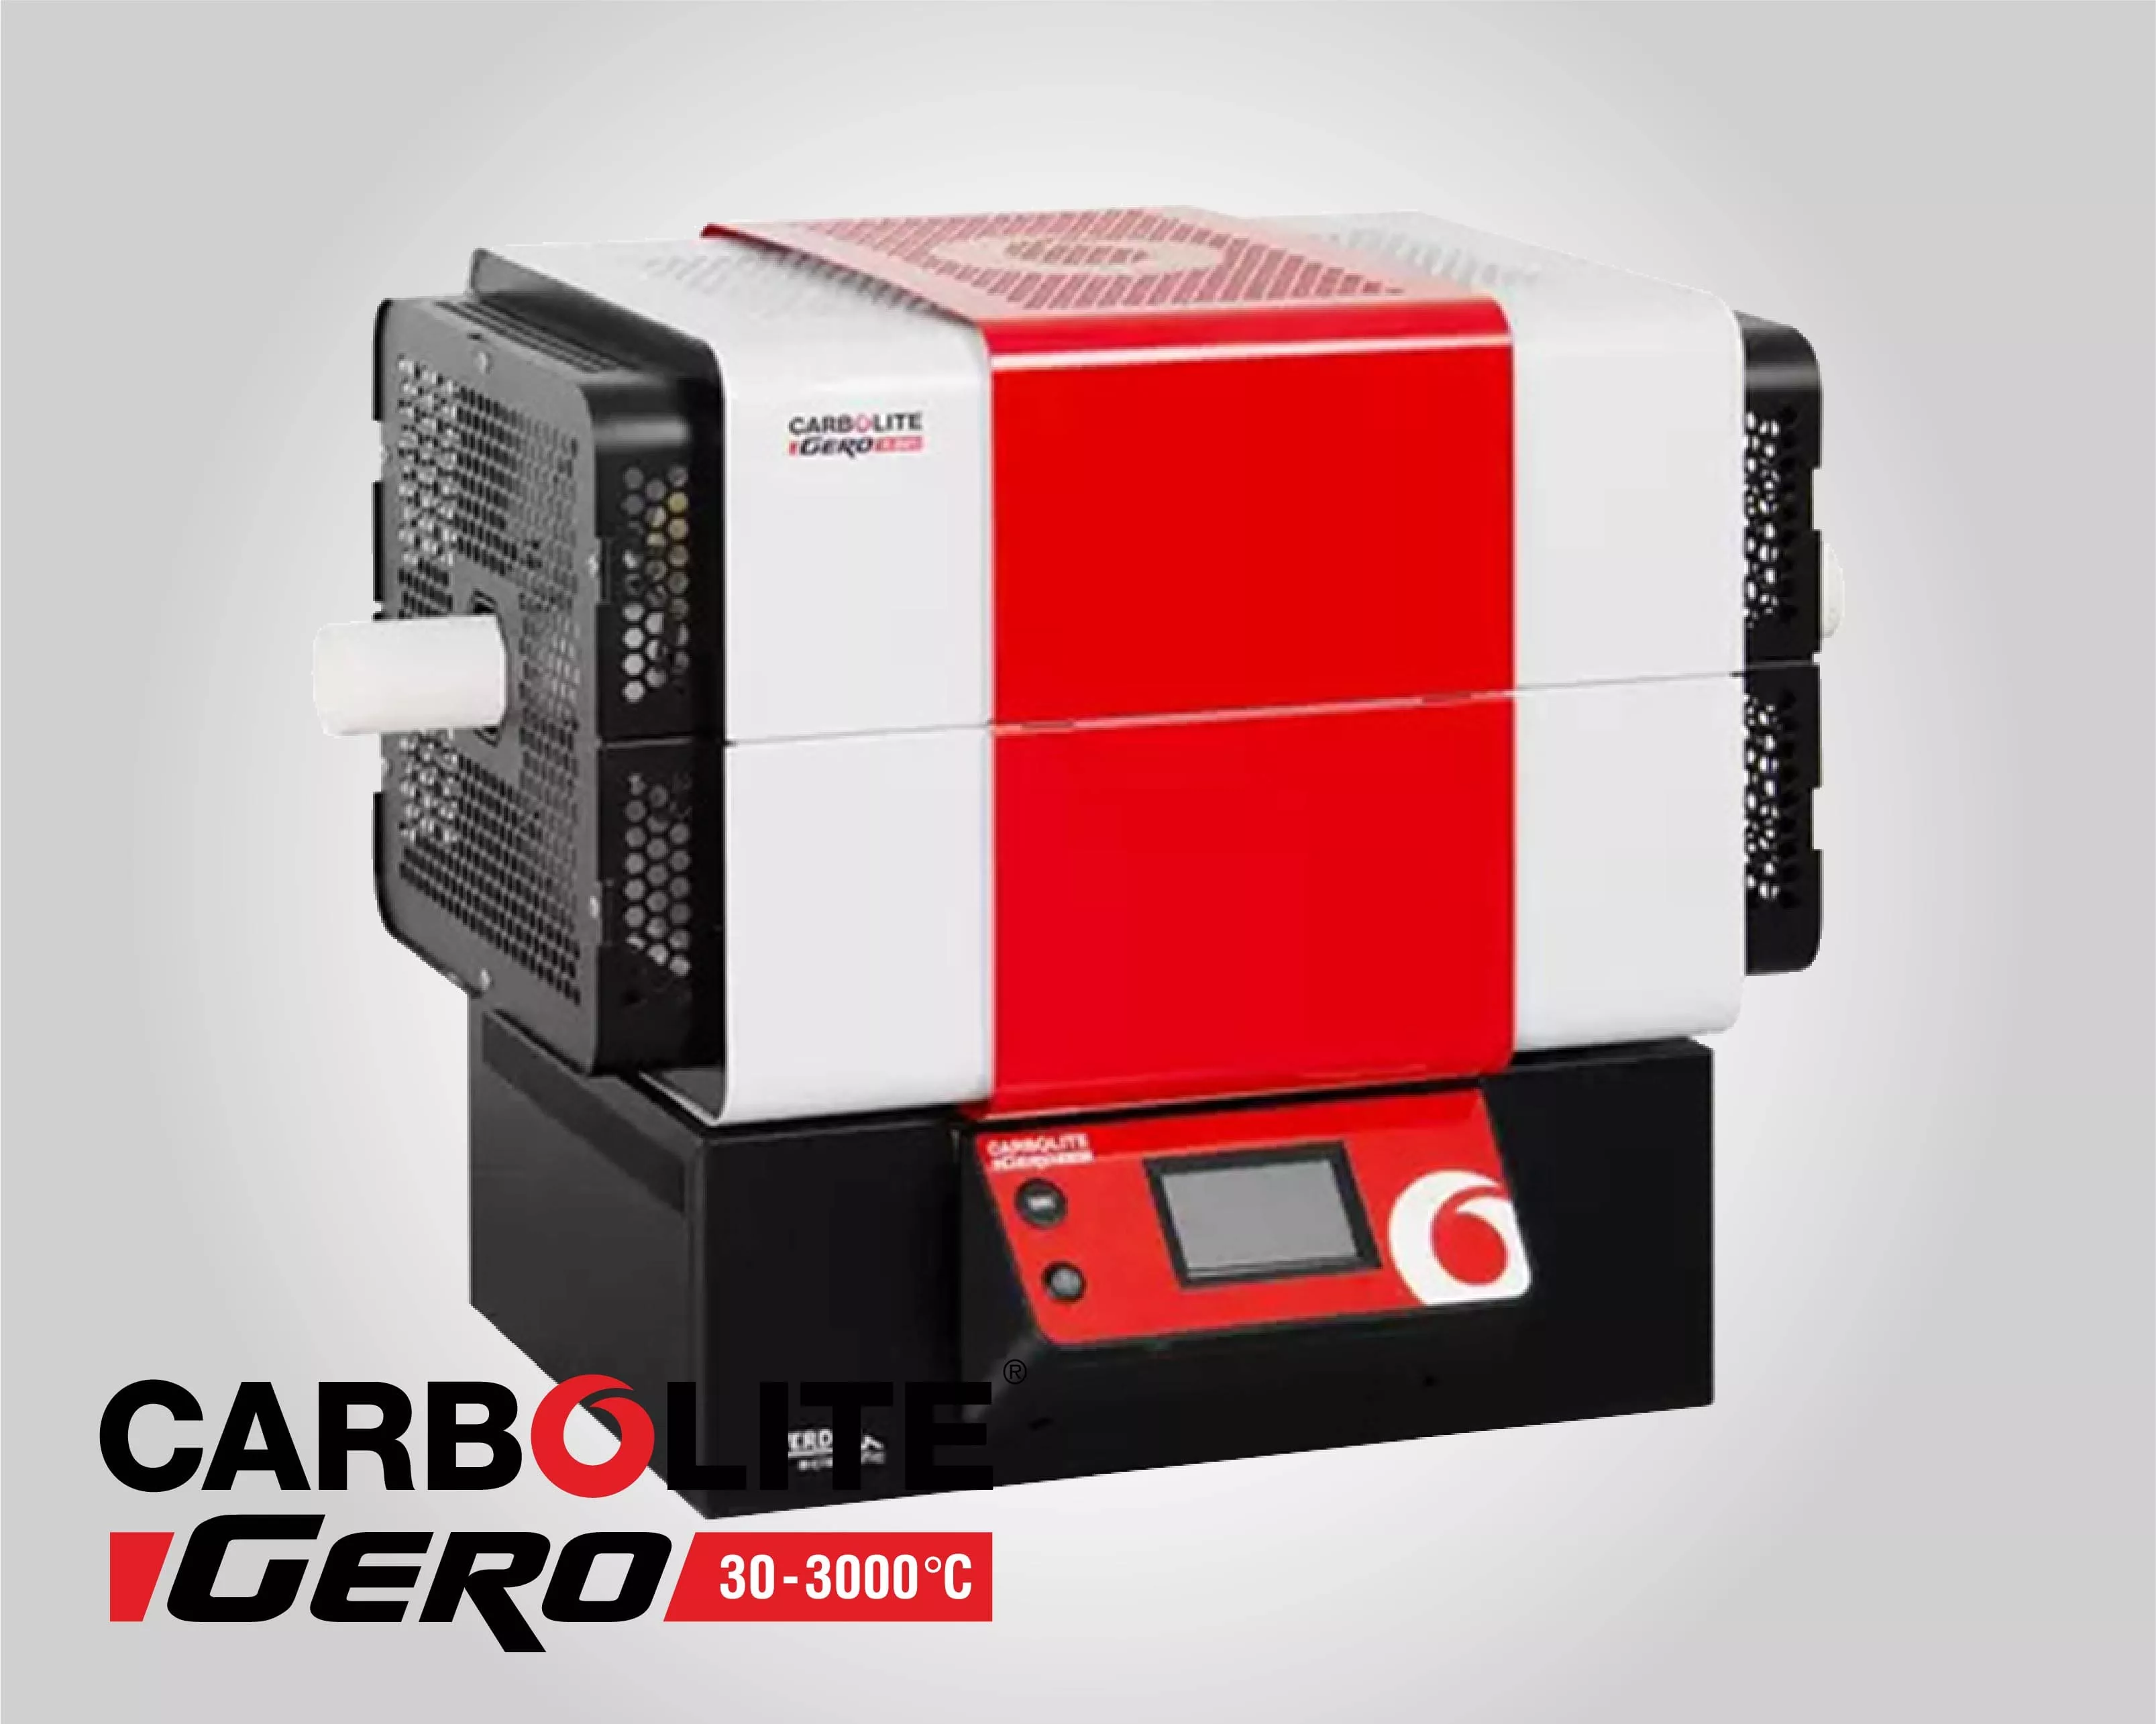 Large industrial furnace & oven systems - Carbolite Gero